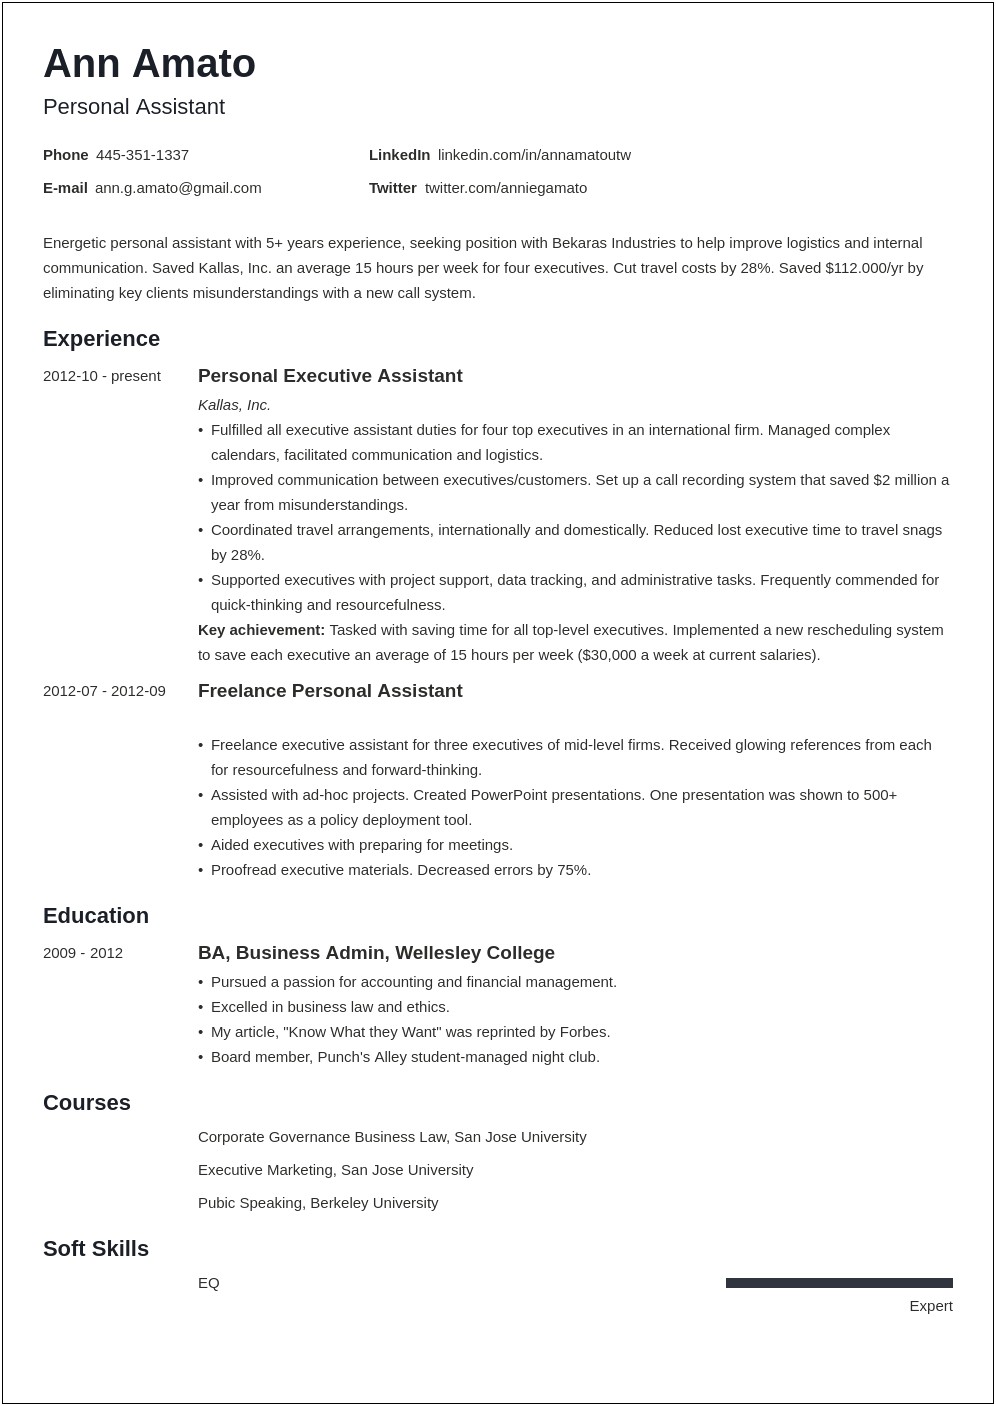 Travel Agency Resume With 20 Yrs Experience